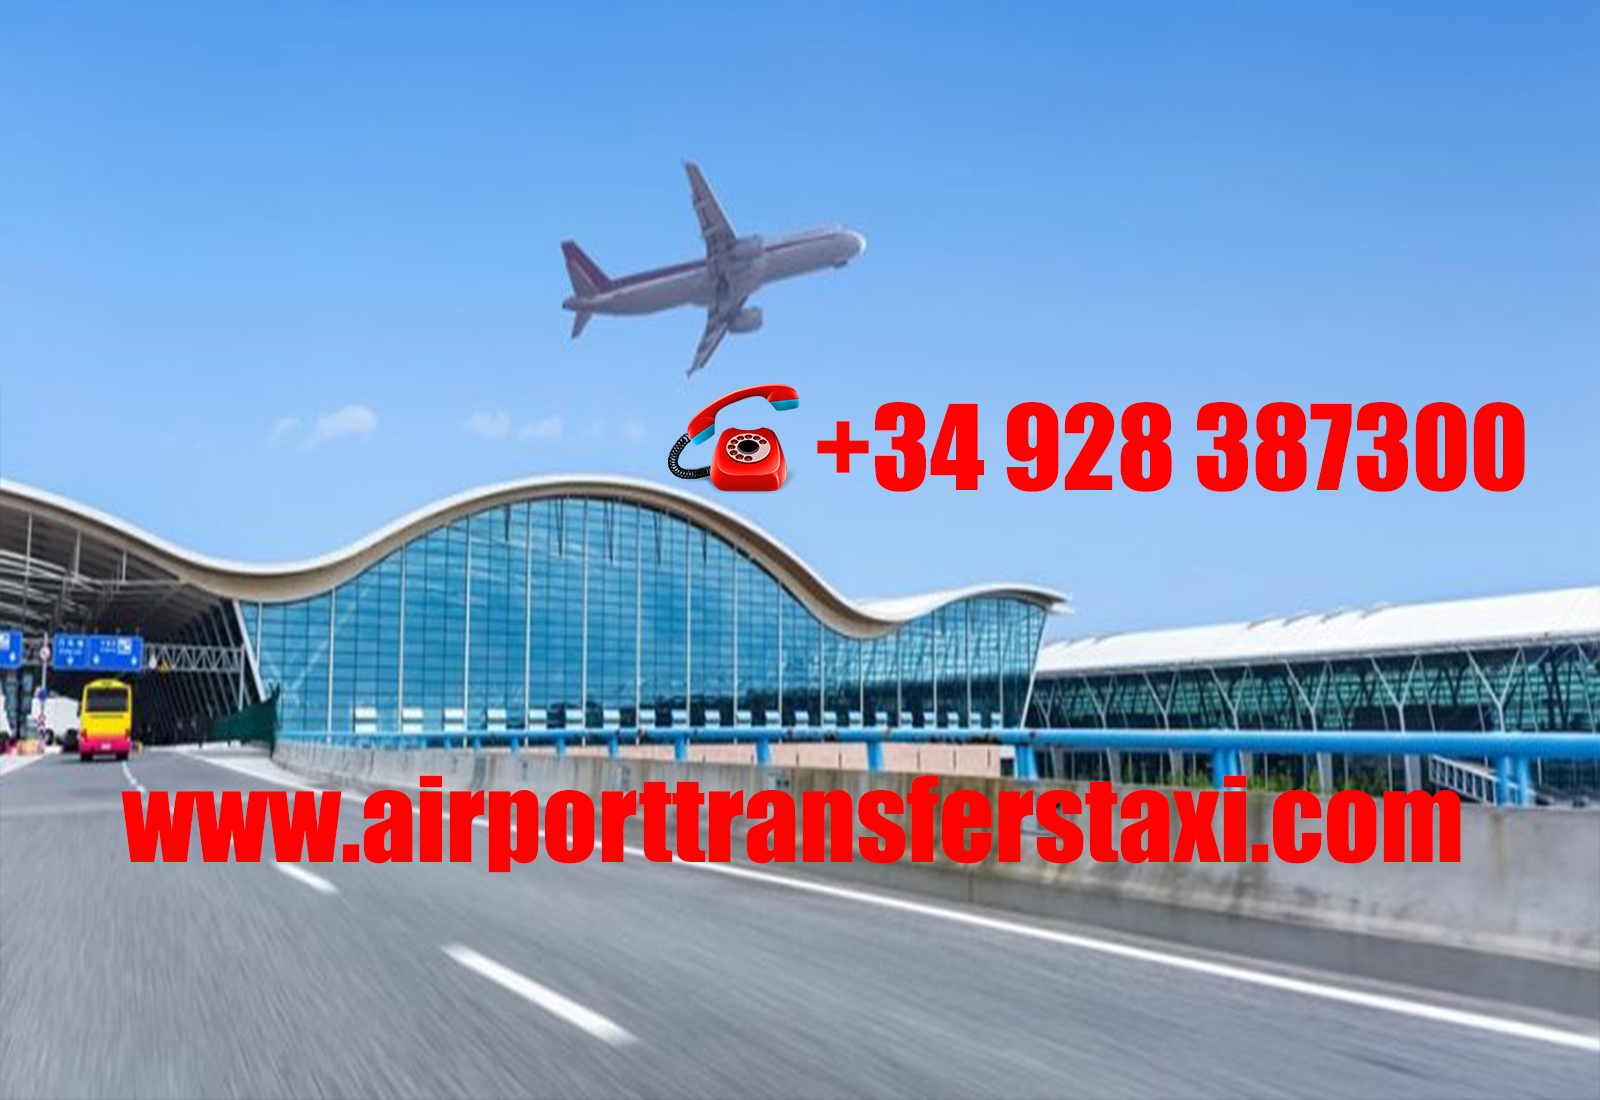 Low Cost Shuttle Canary Islands